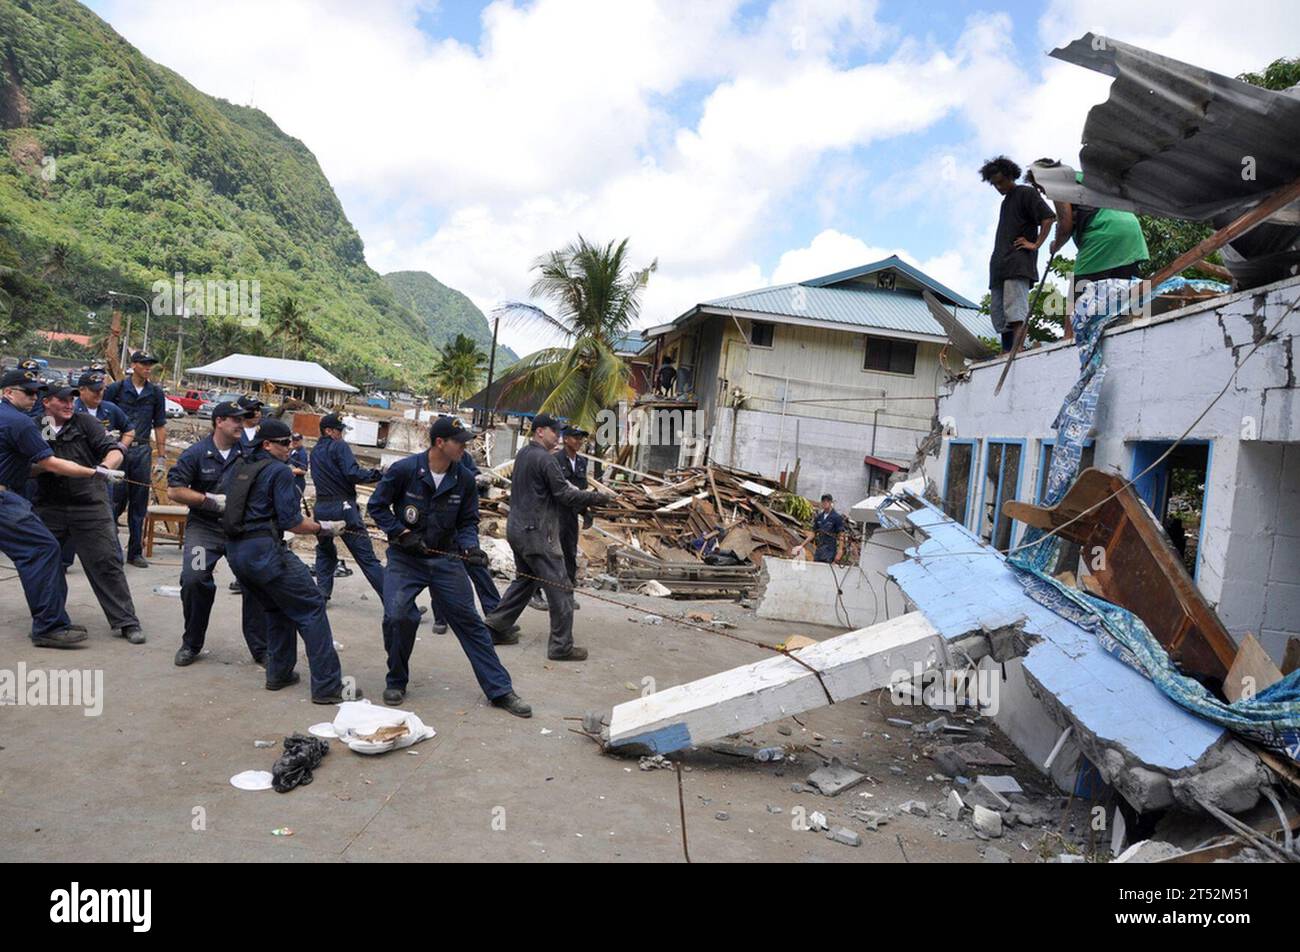 0910033798Y-352 PAGO PAGO (Oct. 3, 2009) Sailors assigned to the guided-missile frigate USS Ingraham (FFG 61) clear away a damaged roof during disaster recovery efforts in Pago Pago, American Samoa. The region was struck by an earthquake and resulting tsunami. (U.S. Air Force Stock Photo